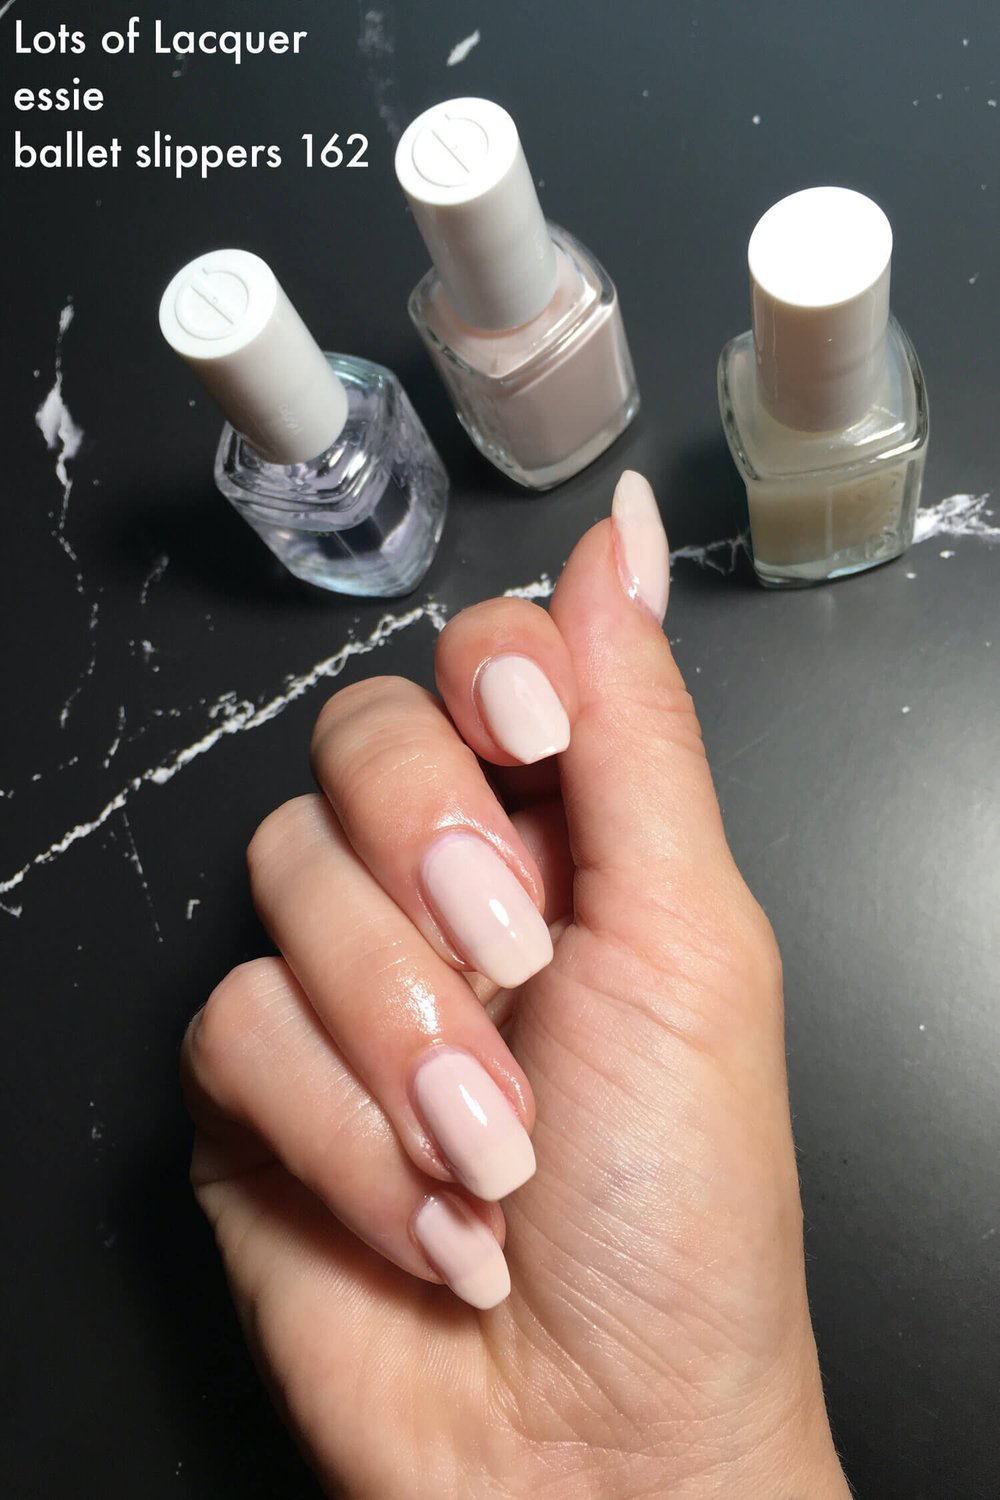 essie ballet slippers Review And Swatches of